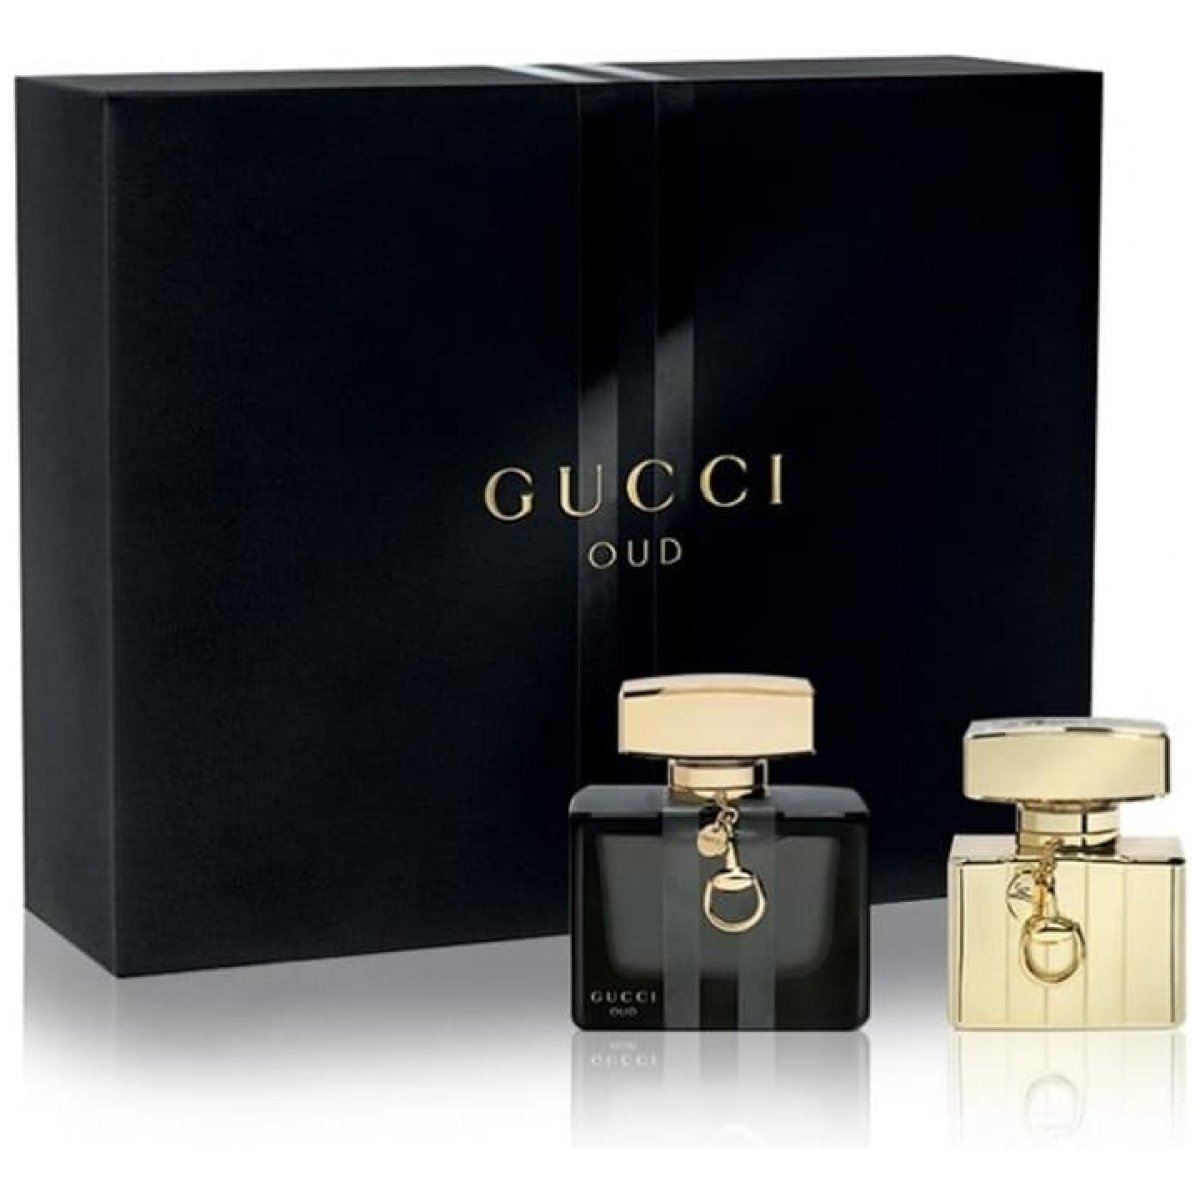 Gucci Oud And Gucci By Gucci Gift Set EDP Perfume For Women 75 ml/30 ml